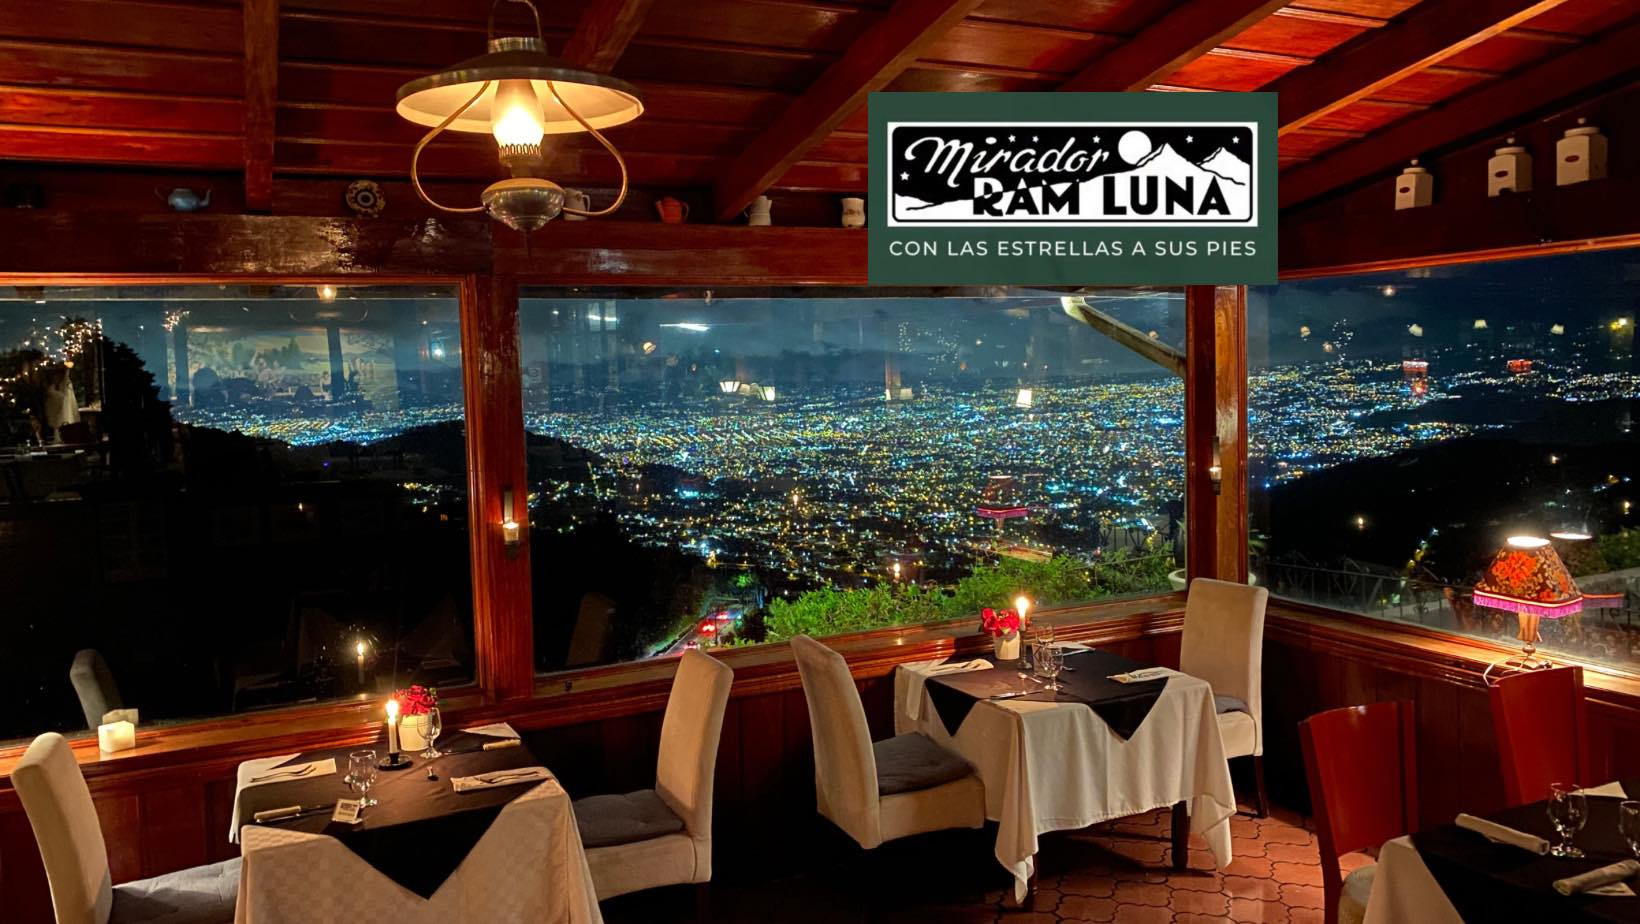 Enjoy a romantic dinner or immerse yourself in the local culture by dining at Ram Luna.